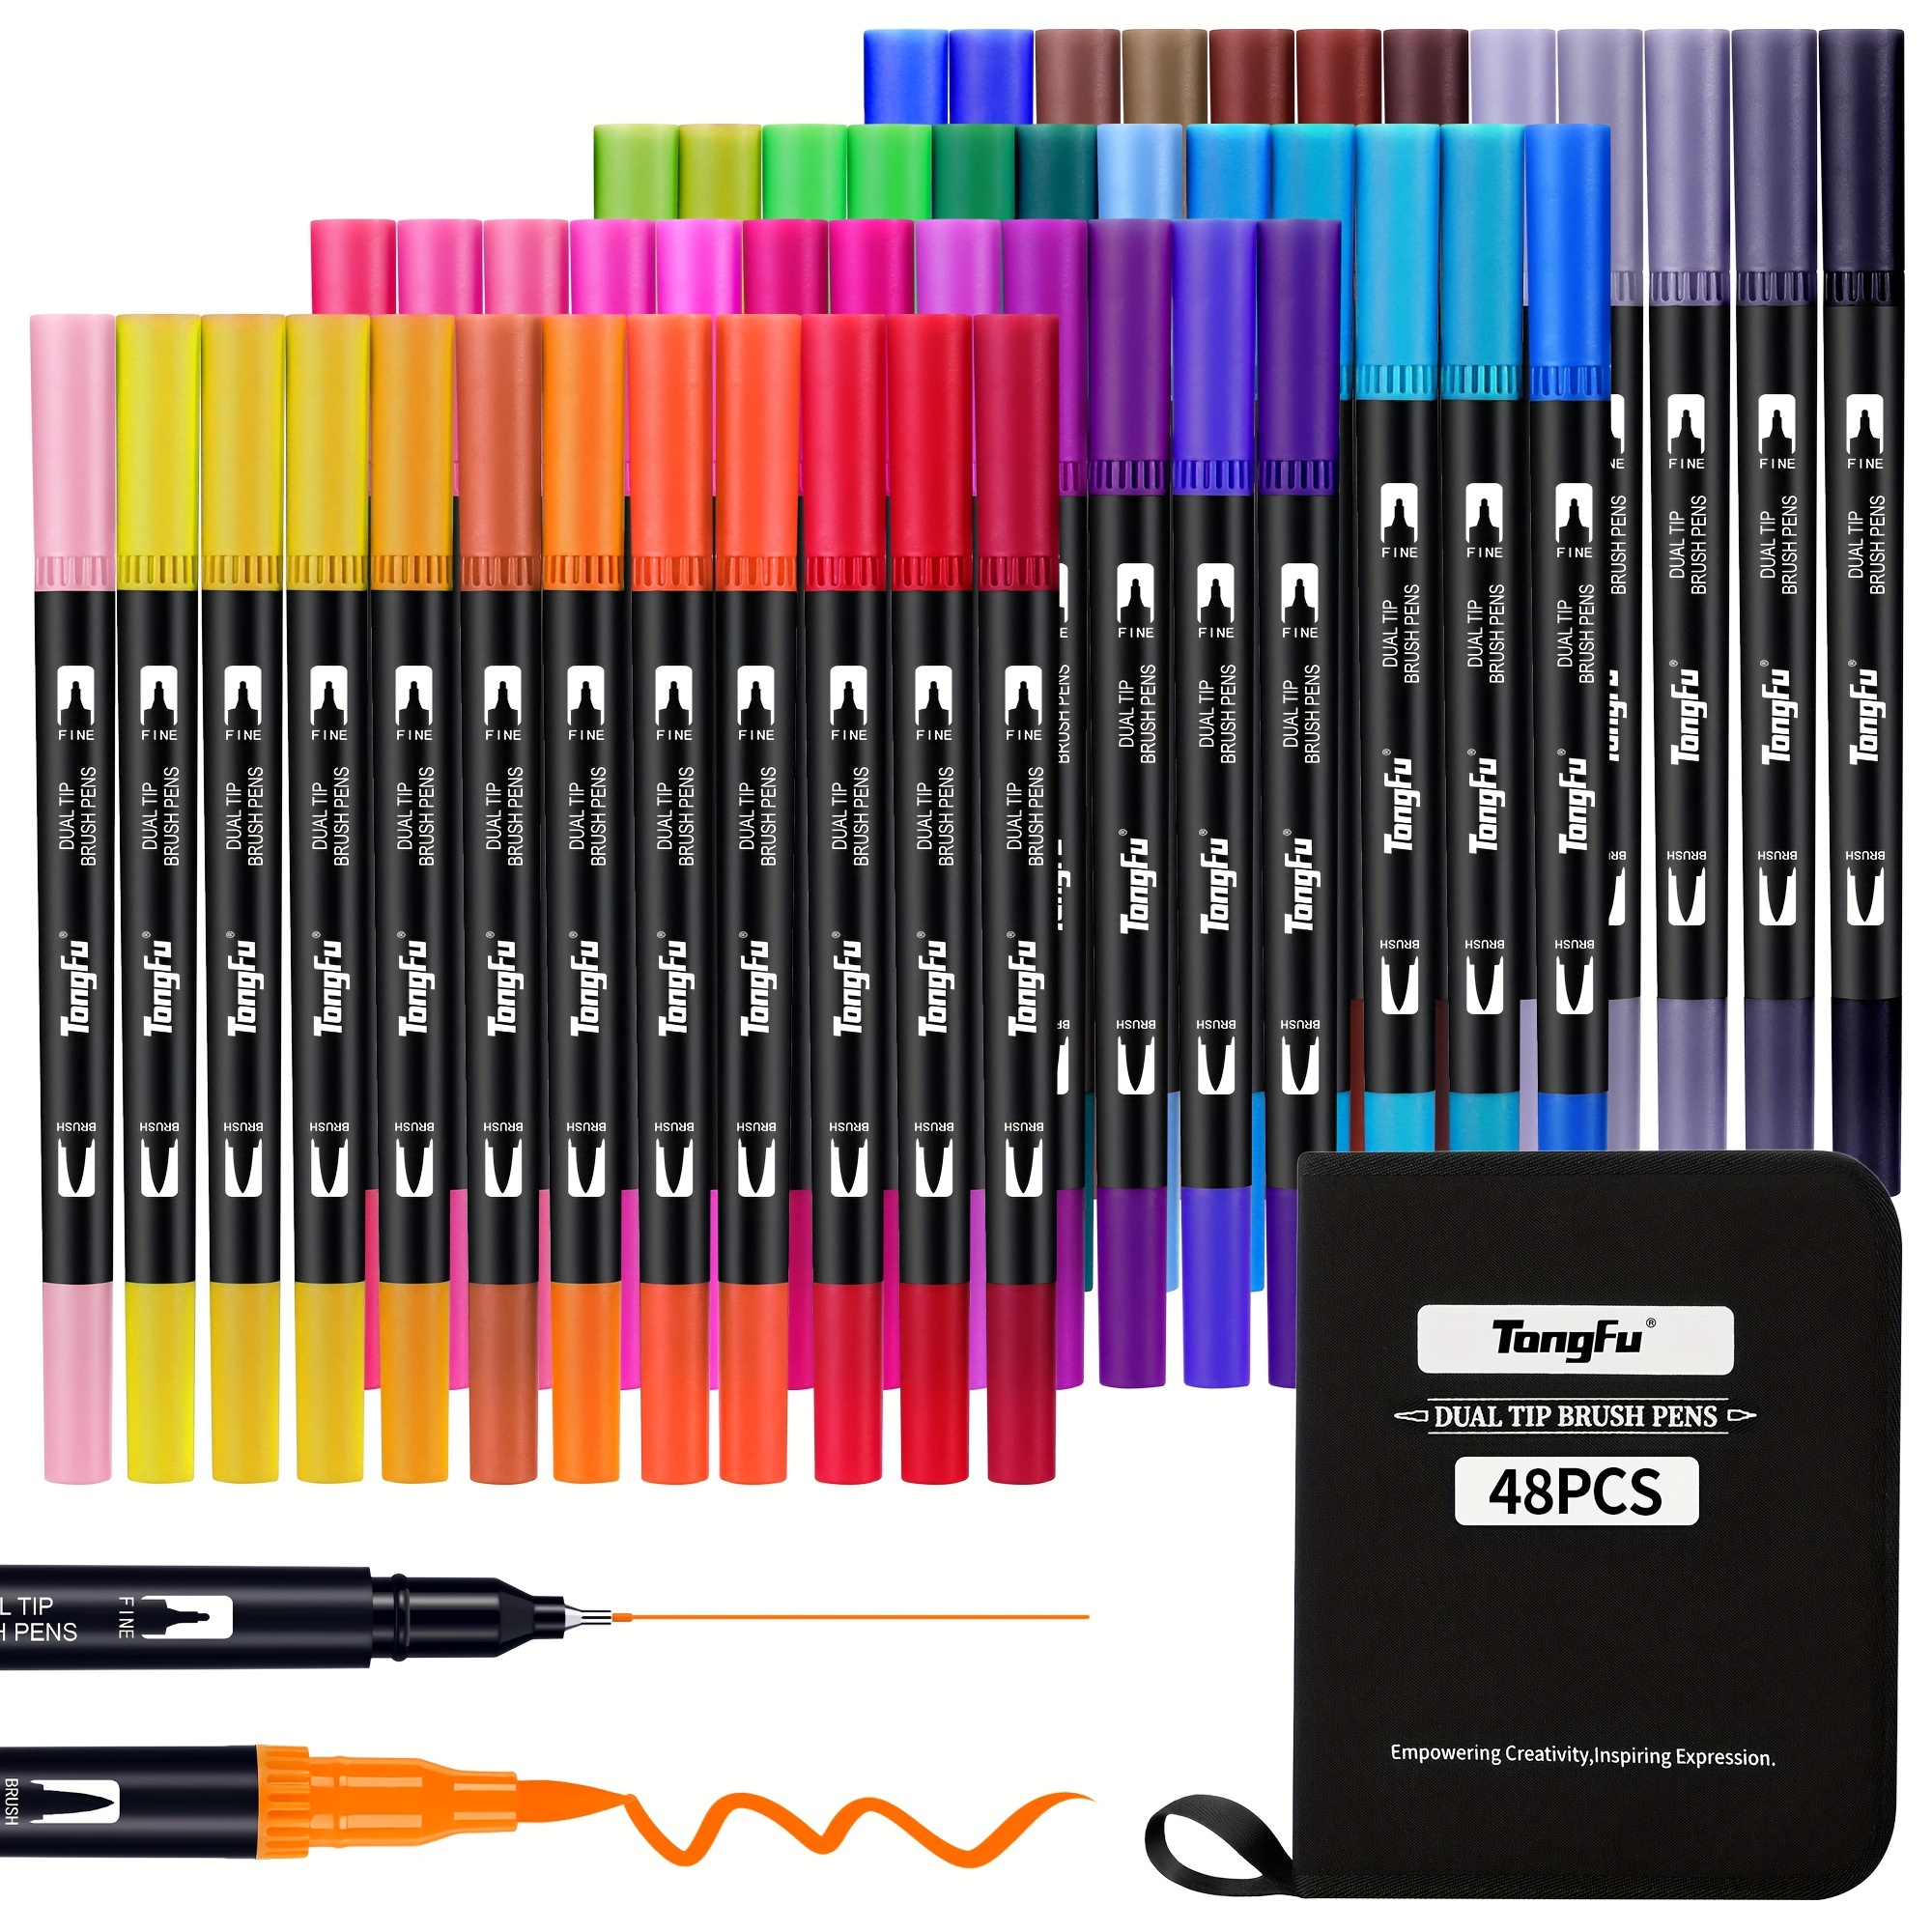 

48 Colors Dual Brush Pen Set, Double-sided Brush Pens, Watercolour Marker For Students Painting, Beginner Lettering, Card Making, Books Craft Coloring Doodling, Bullet Journal, Scrapbooking